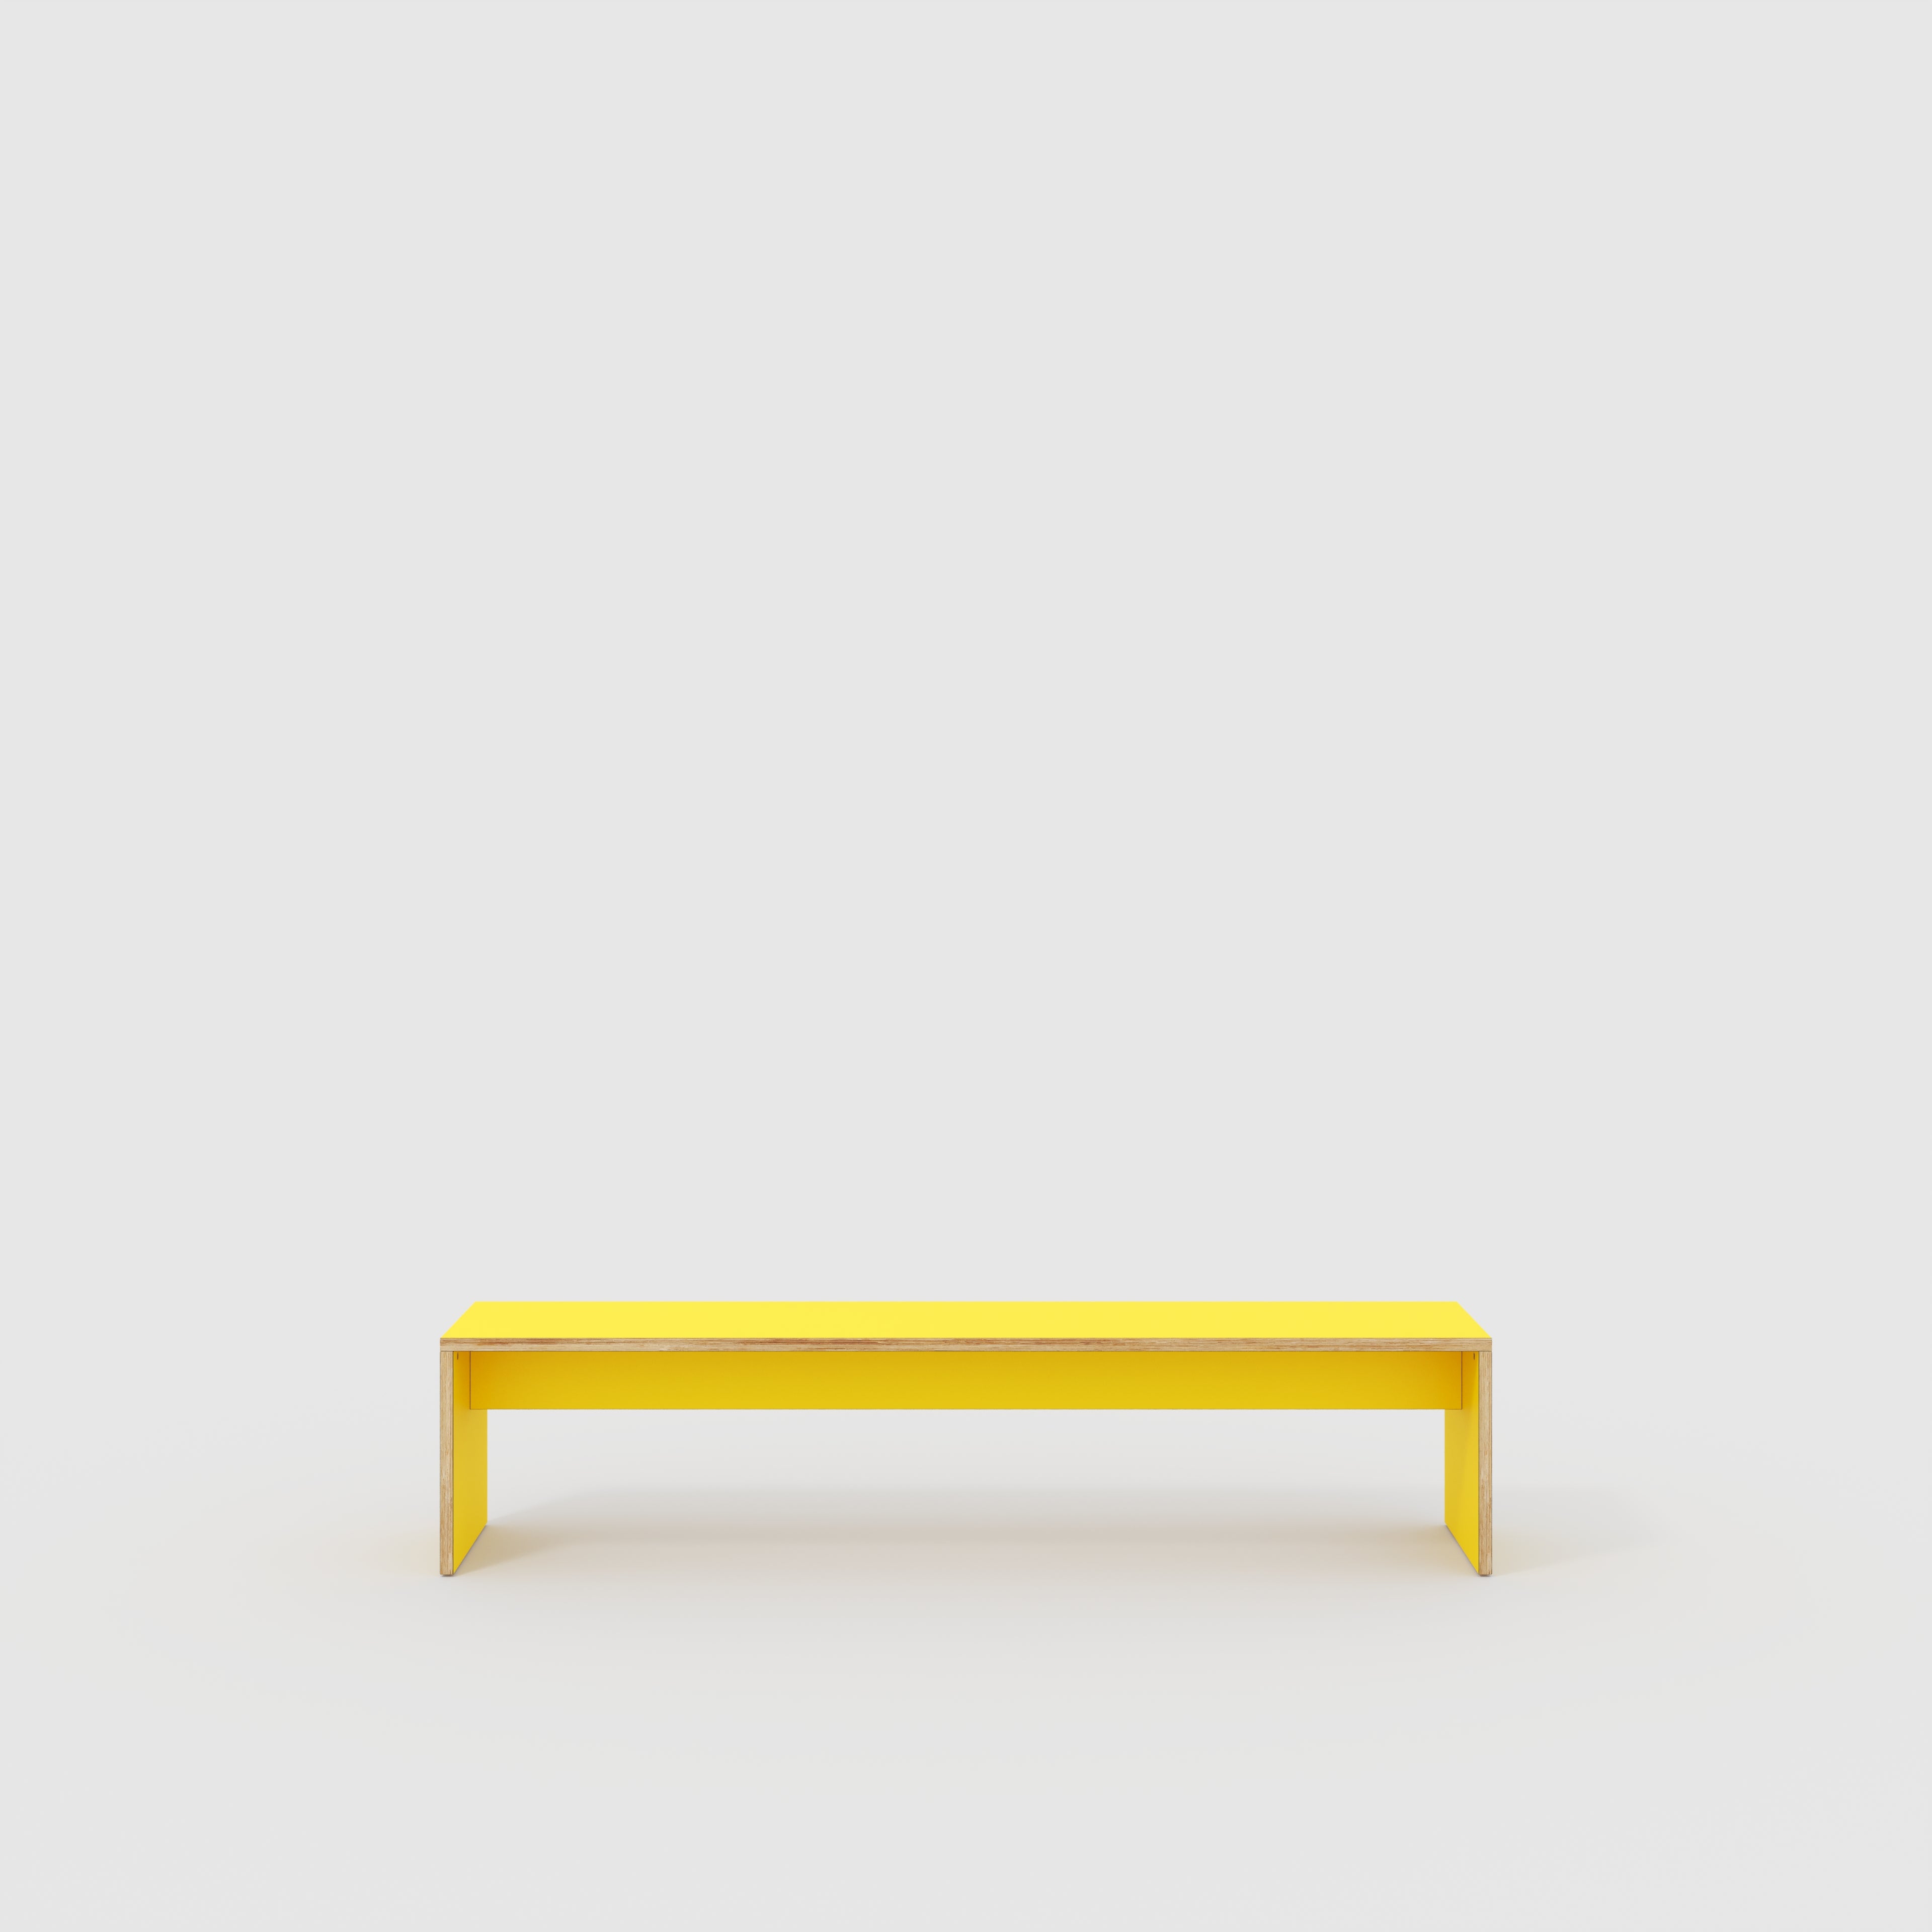 Bench Seat with Solid Sides - Formica Chrome Yellow - 2000(w) x 400(d)